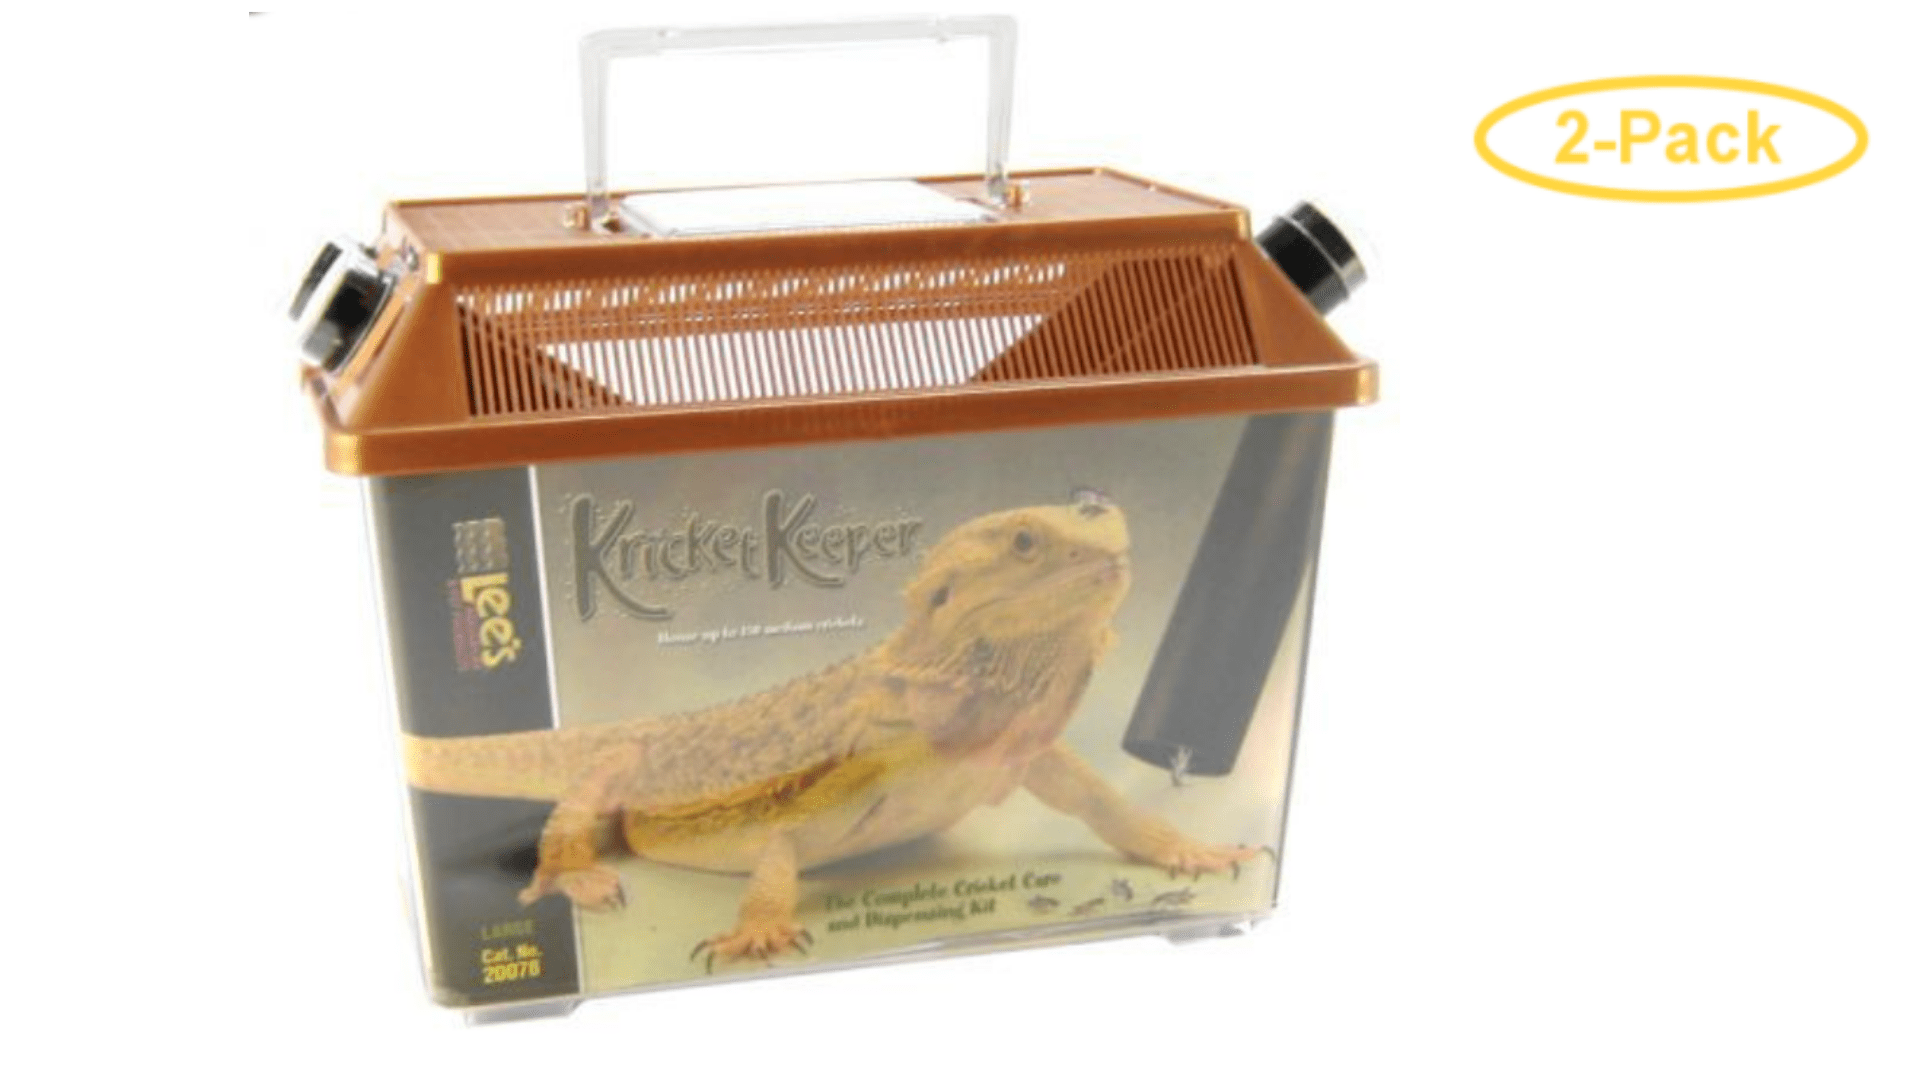 Kricket Keeper Small Cricket Carrier Habitat Reptile Houses Food Holder Parts 